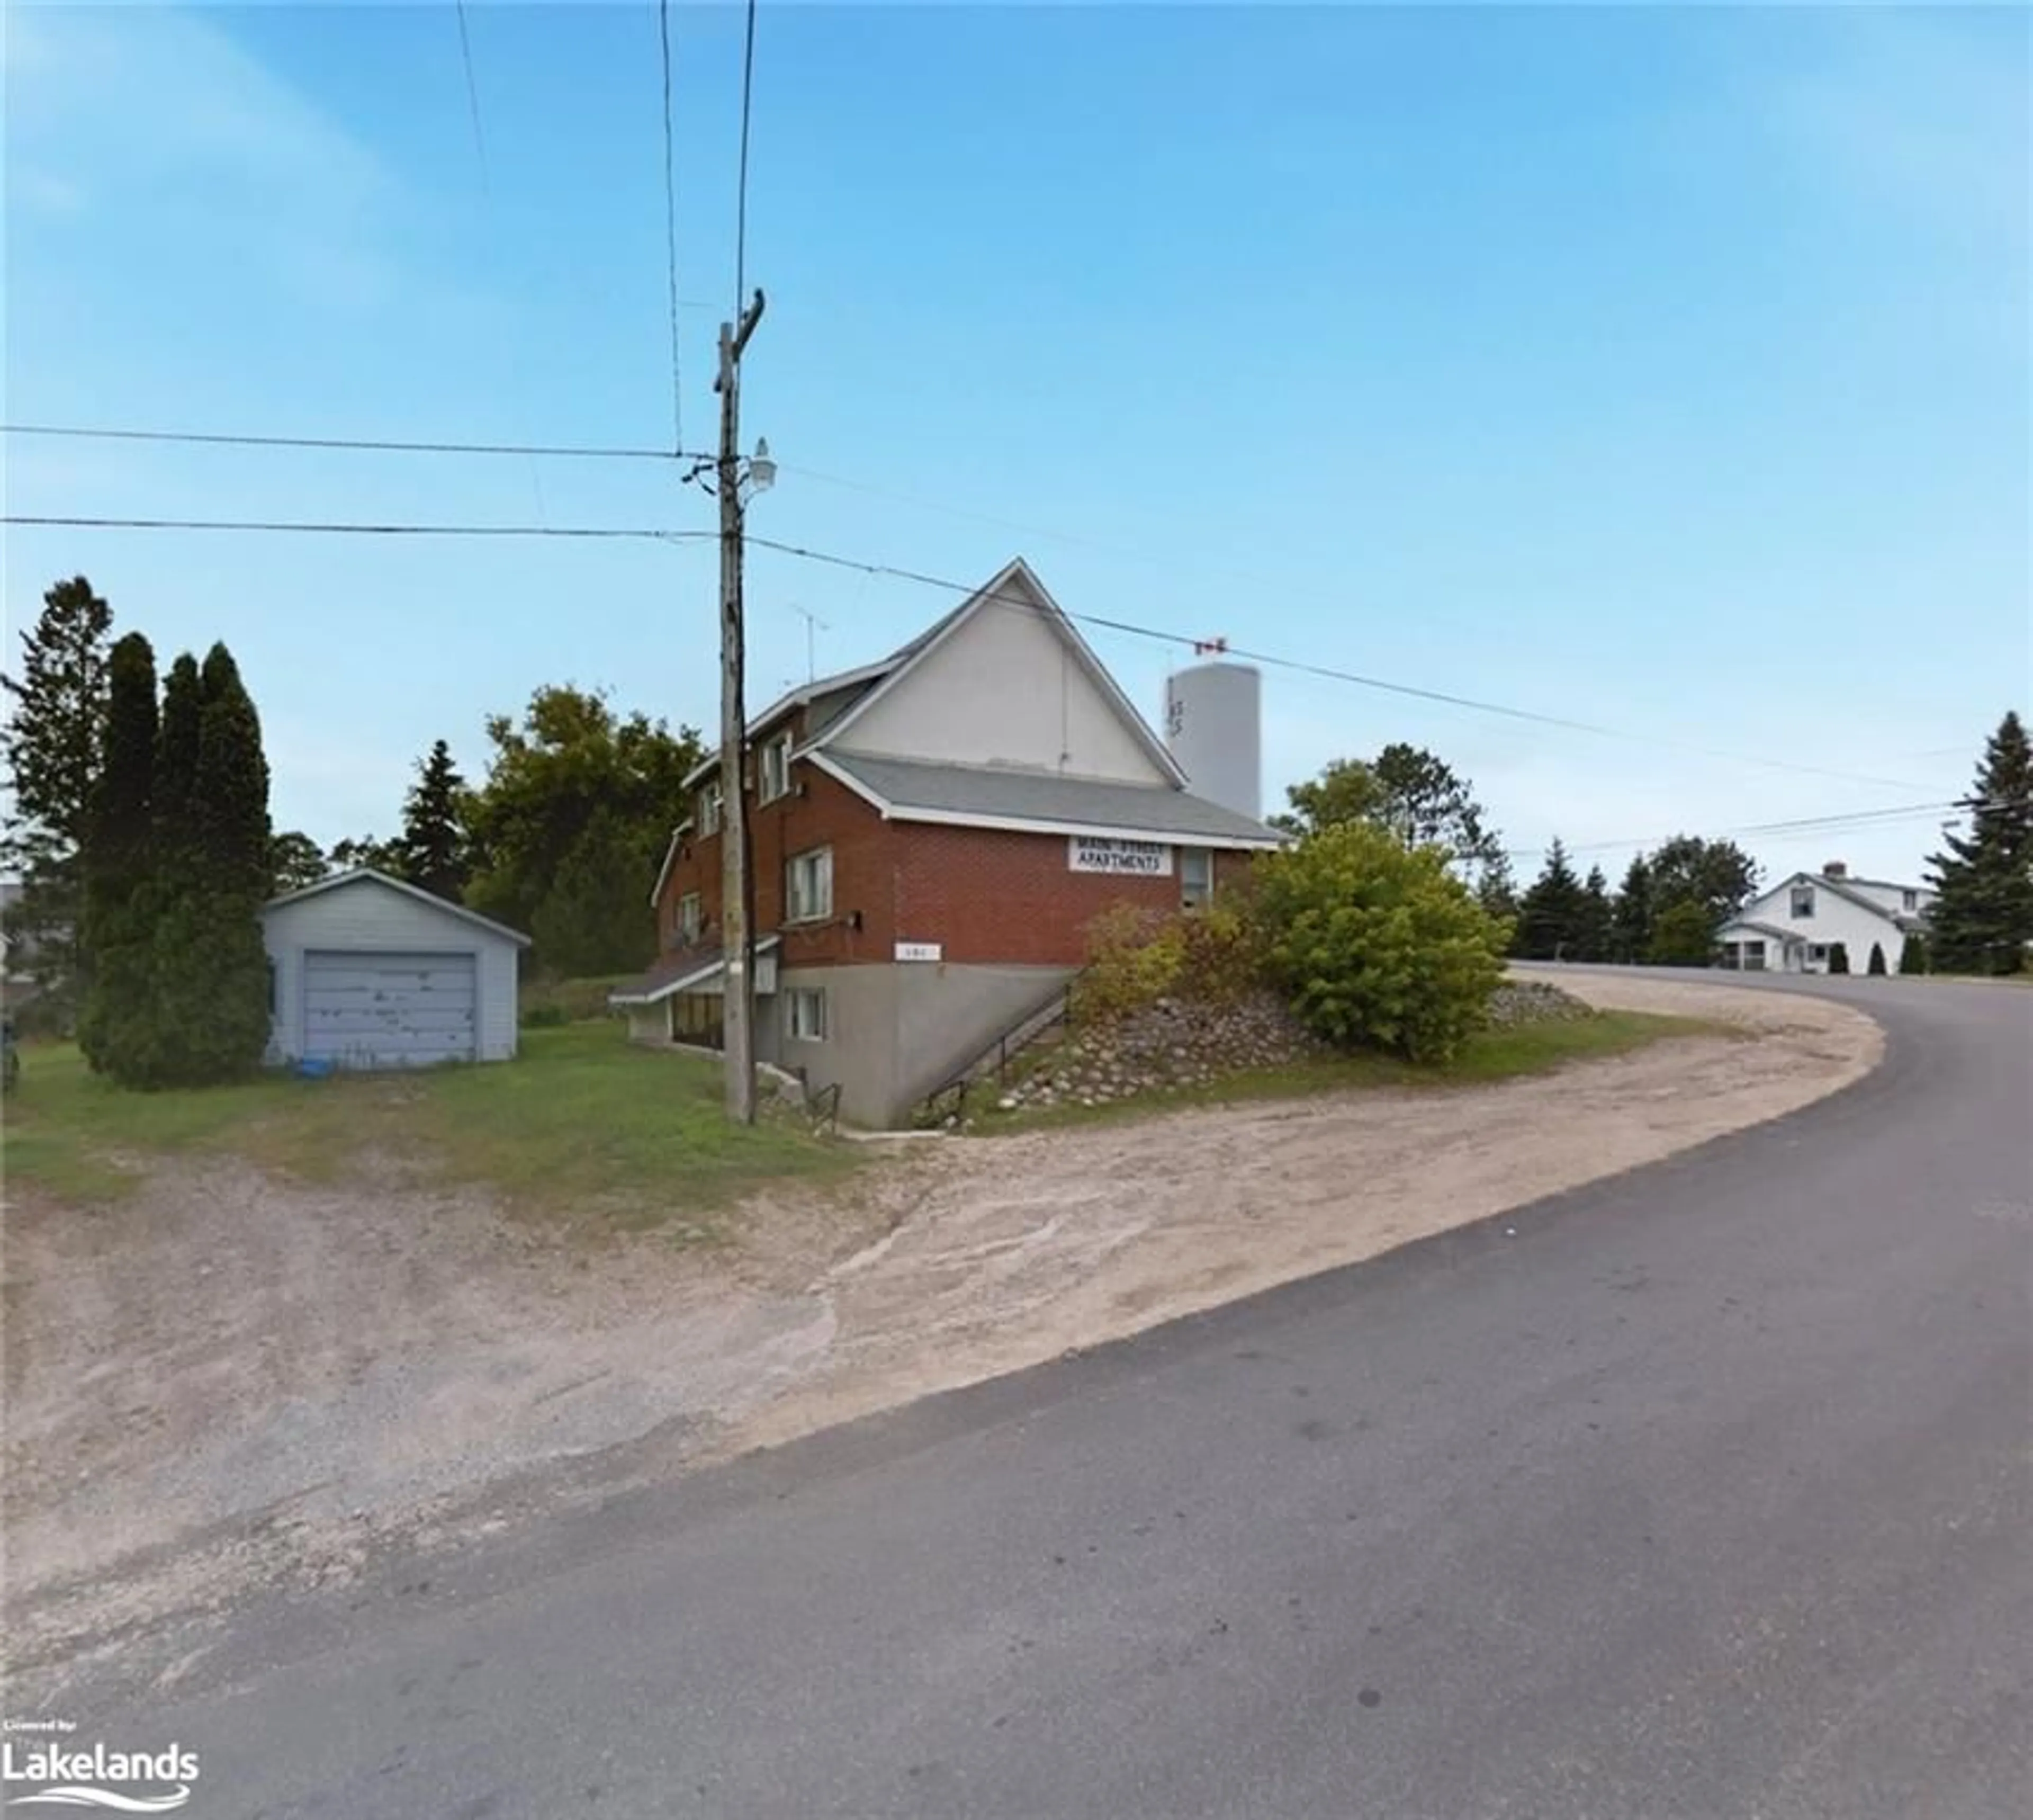 Street view for 161 Main St, Burk's Falls Ontario P0A 1C0